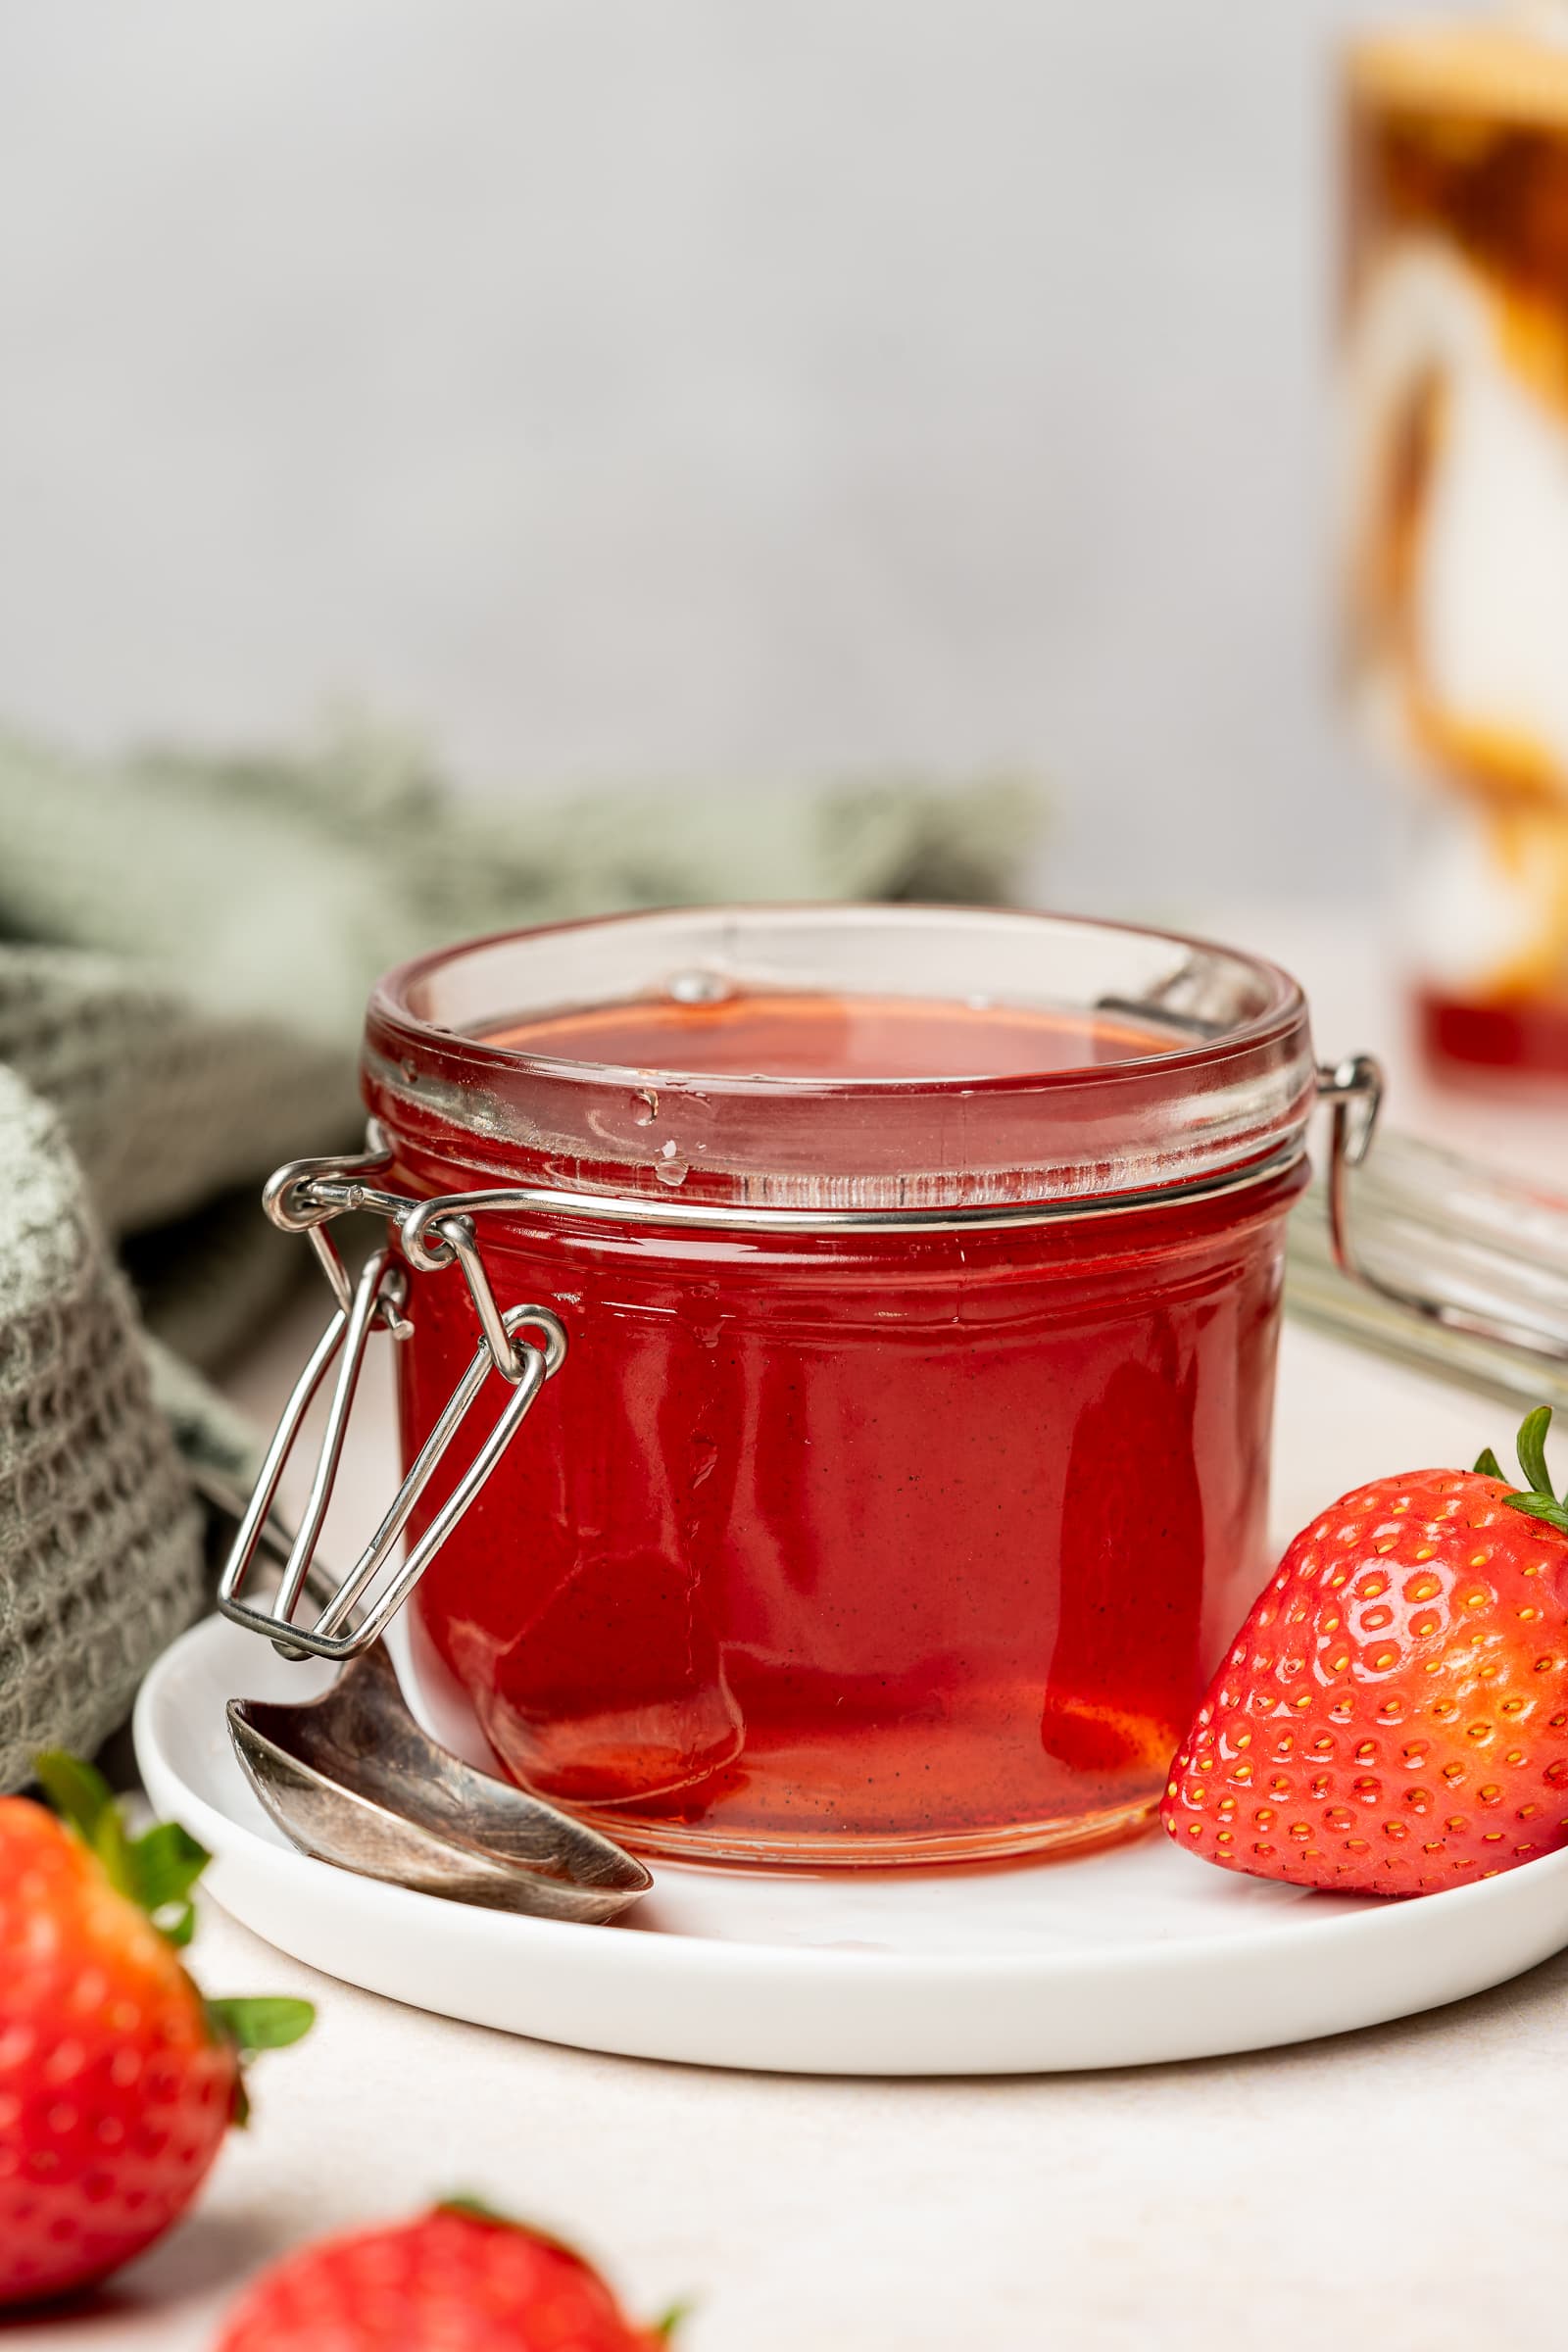 Strawberry simple syrup in a small jar on a white plate and surrounded by strawberries.